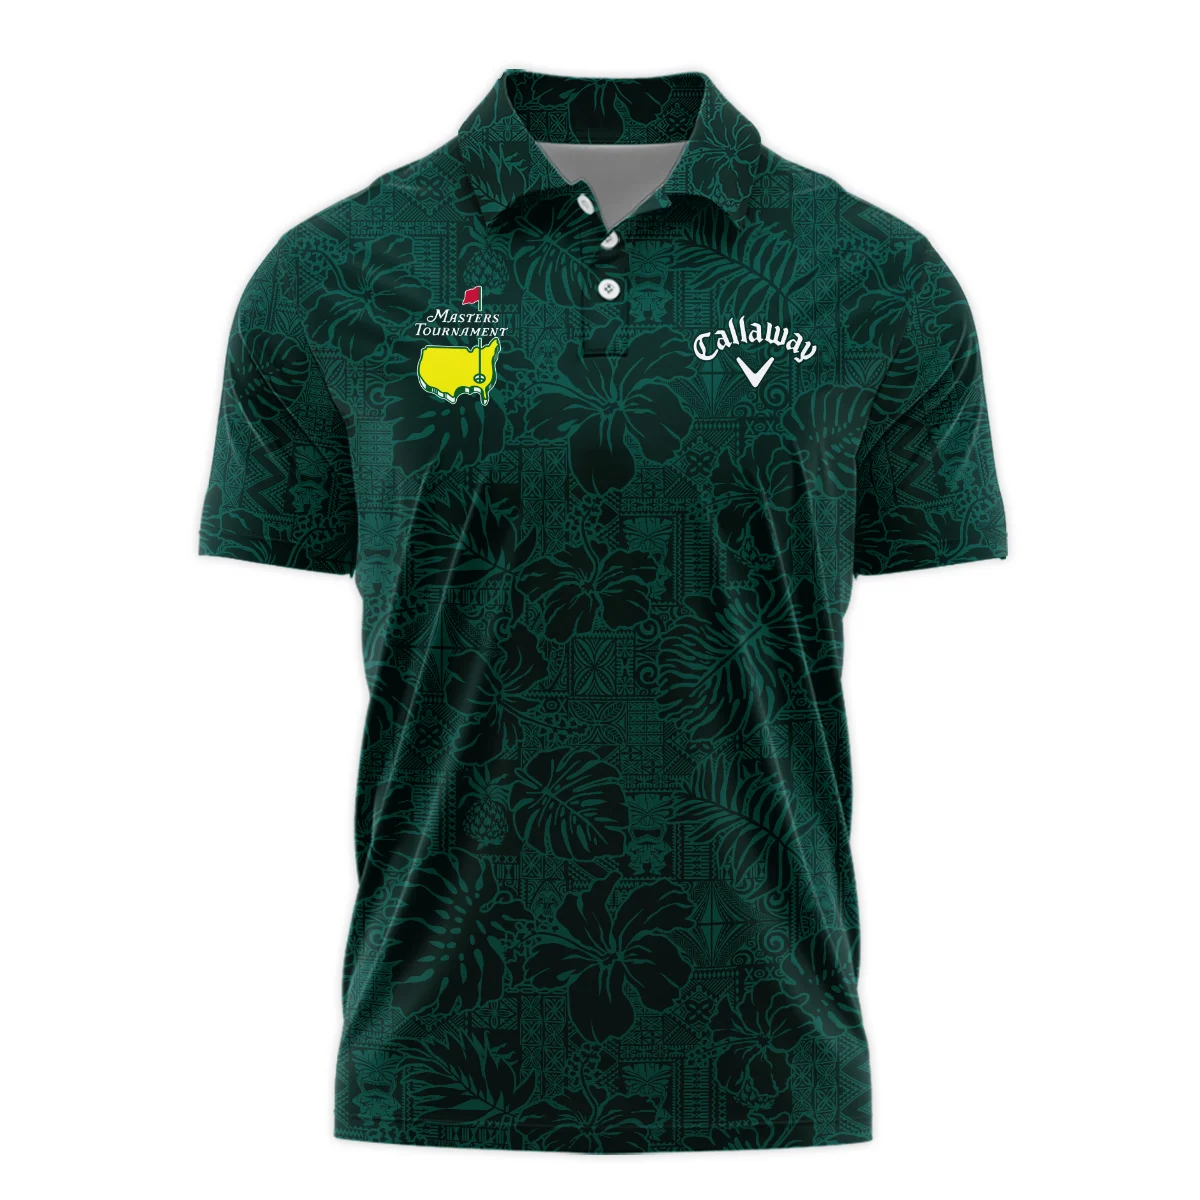 Hibiscus And Tropical Leaves With Tribal Elements Pattern Golf Masters Tournament Callaway Polo Shirt Style Classic Polo Shirt For Men